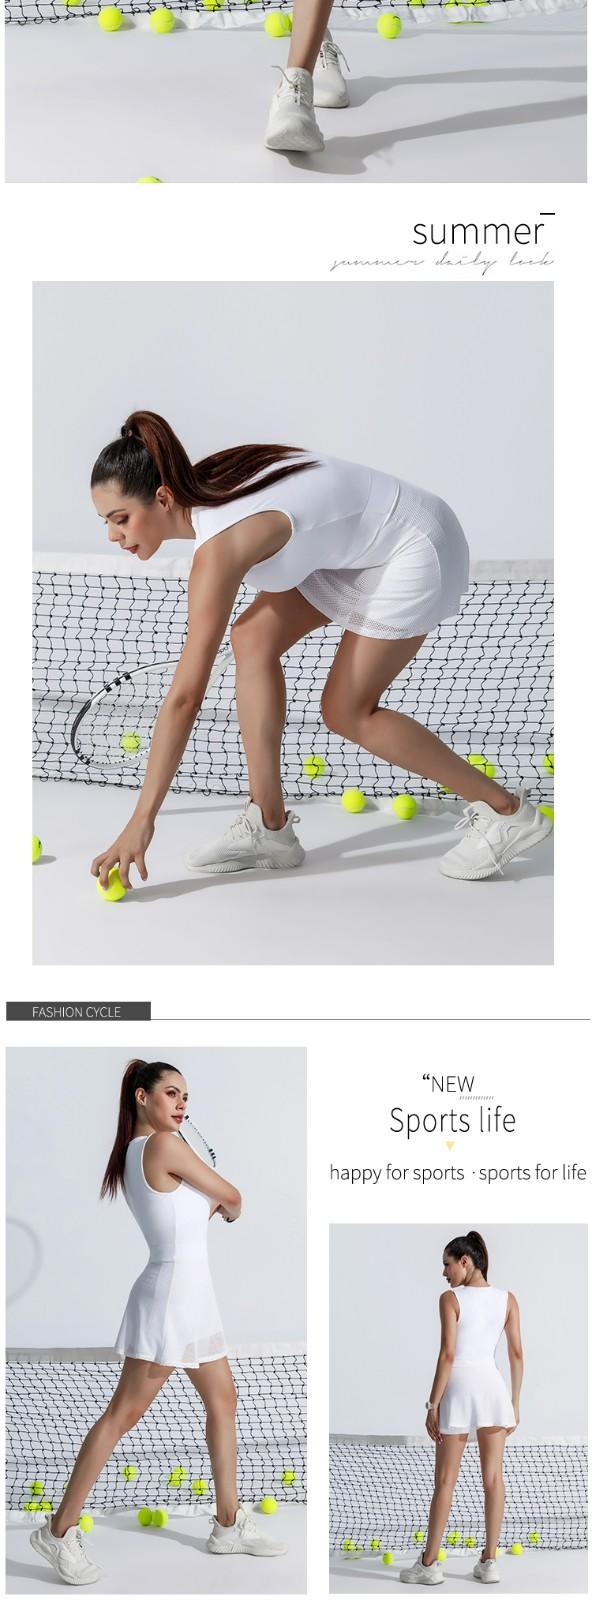 INGOR women's tennis outfits production for sport